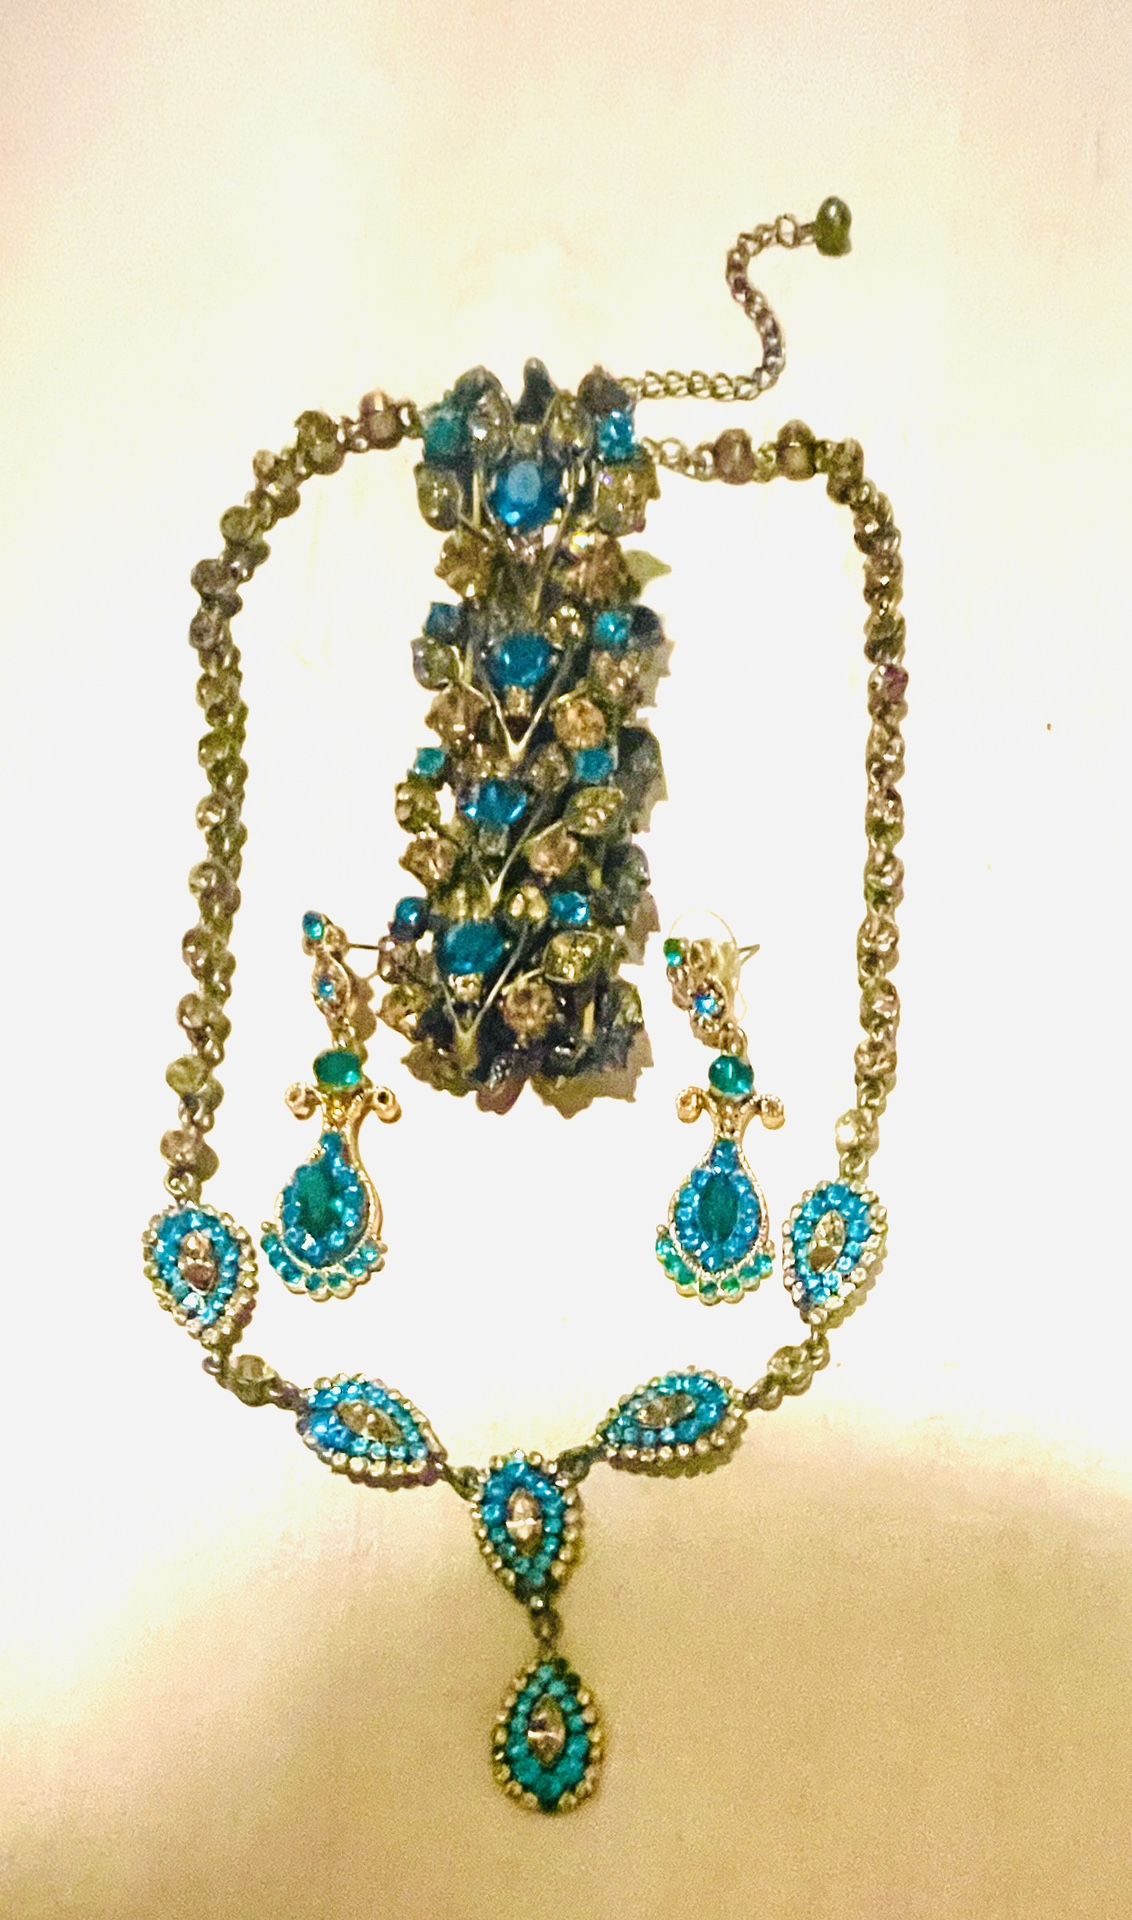 Beautiful Vintage Turquoise And Copper Jeweled Bracelet, Necklace, Earrings